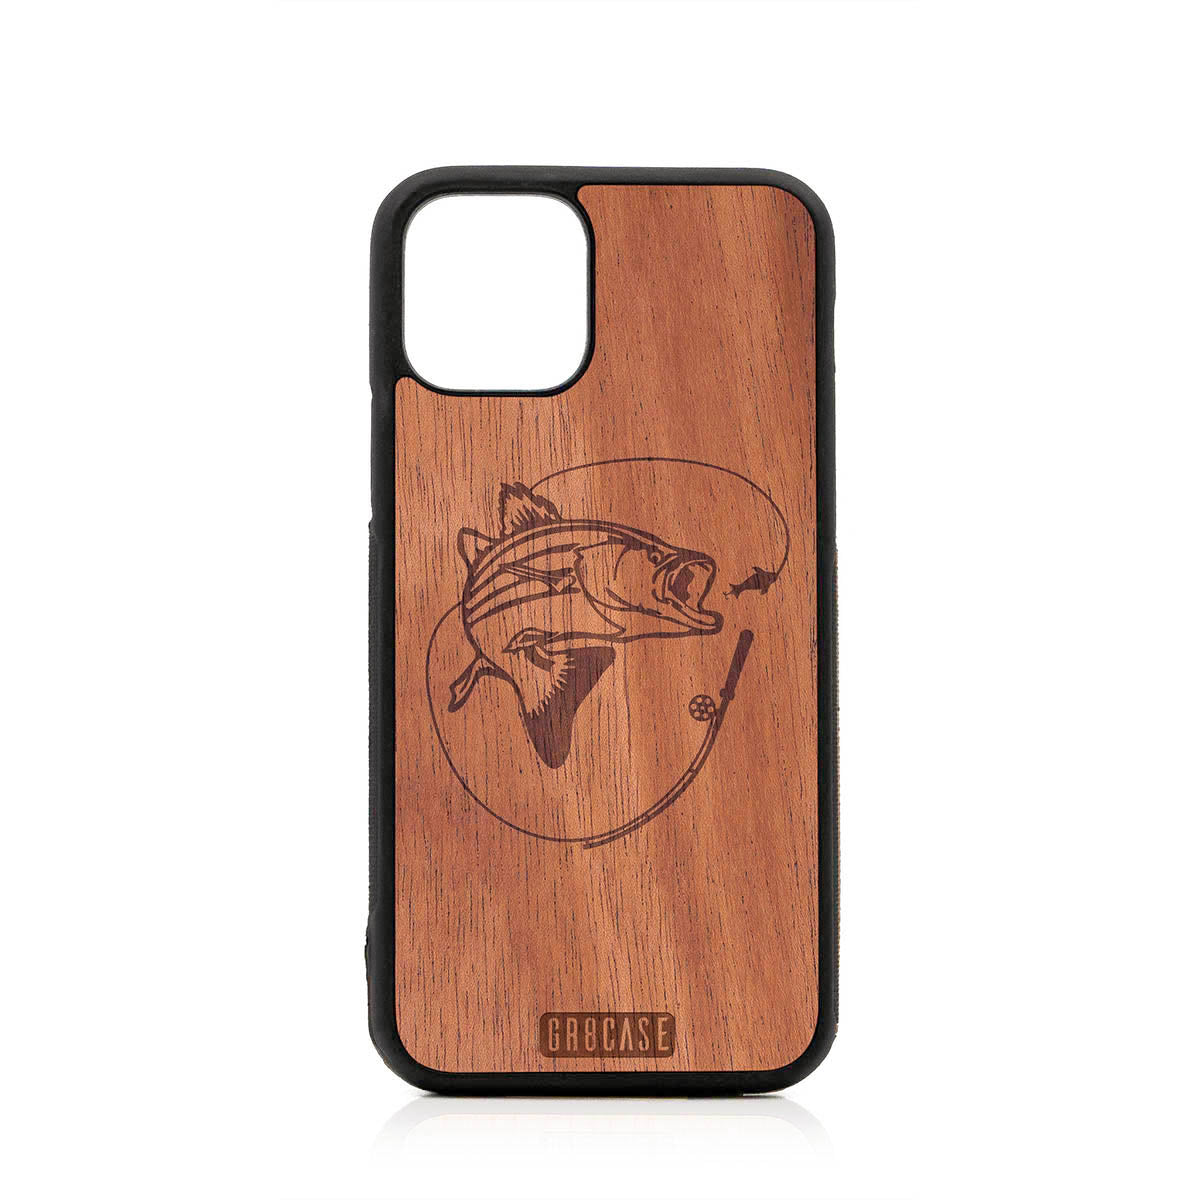 Fish and Reel Design Wood Case For iPhone 11 Pro by GR8CASE